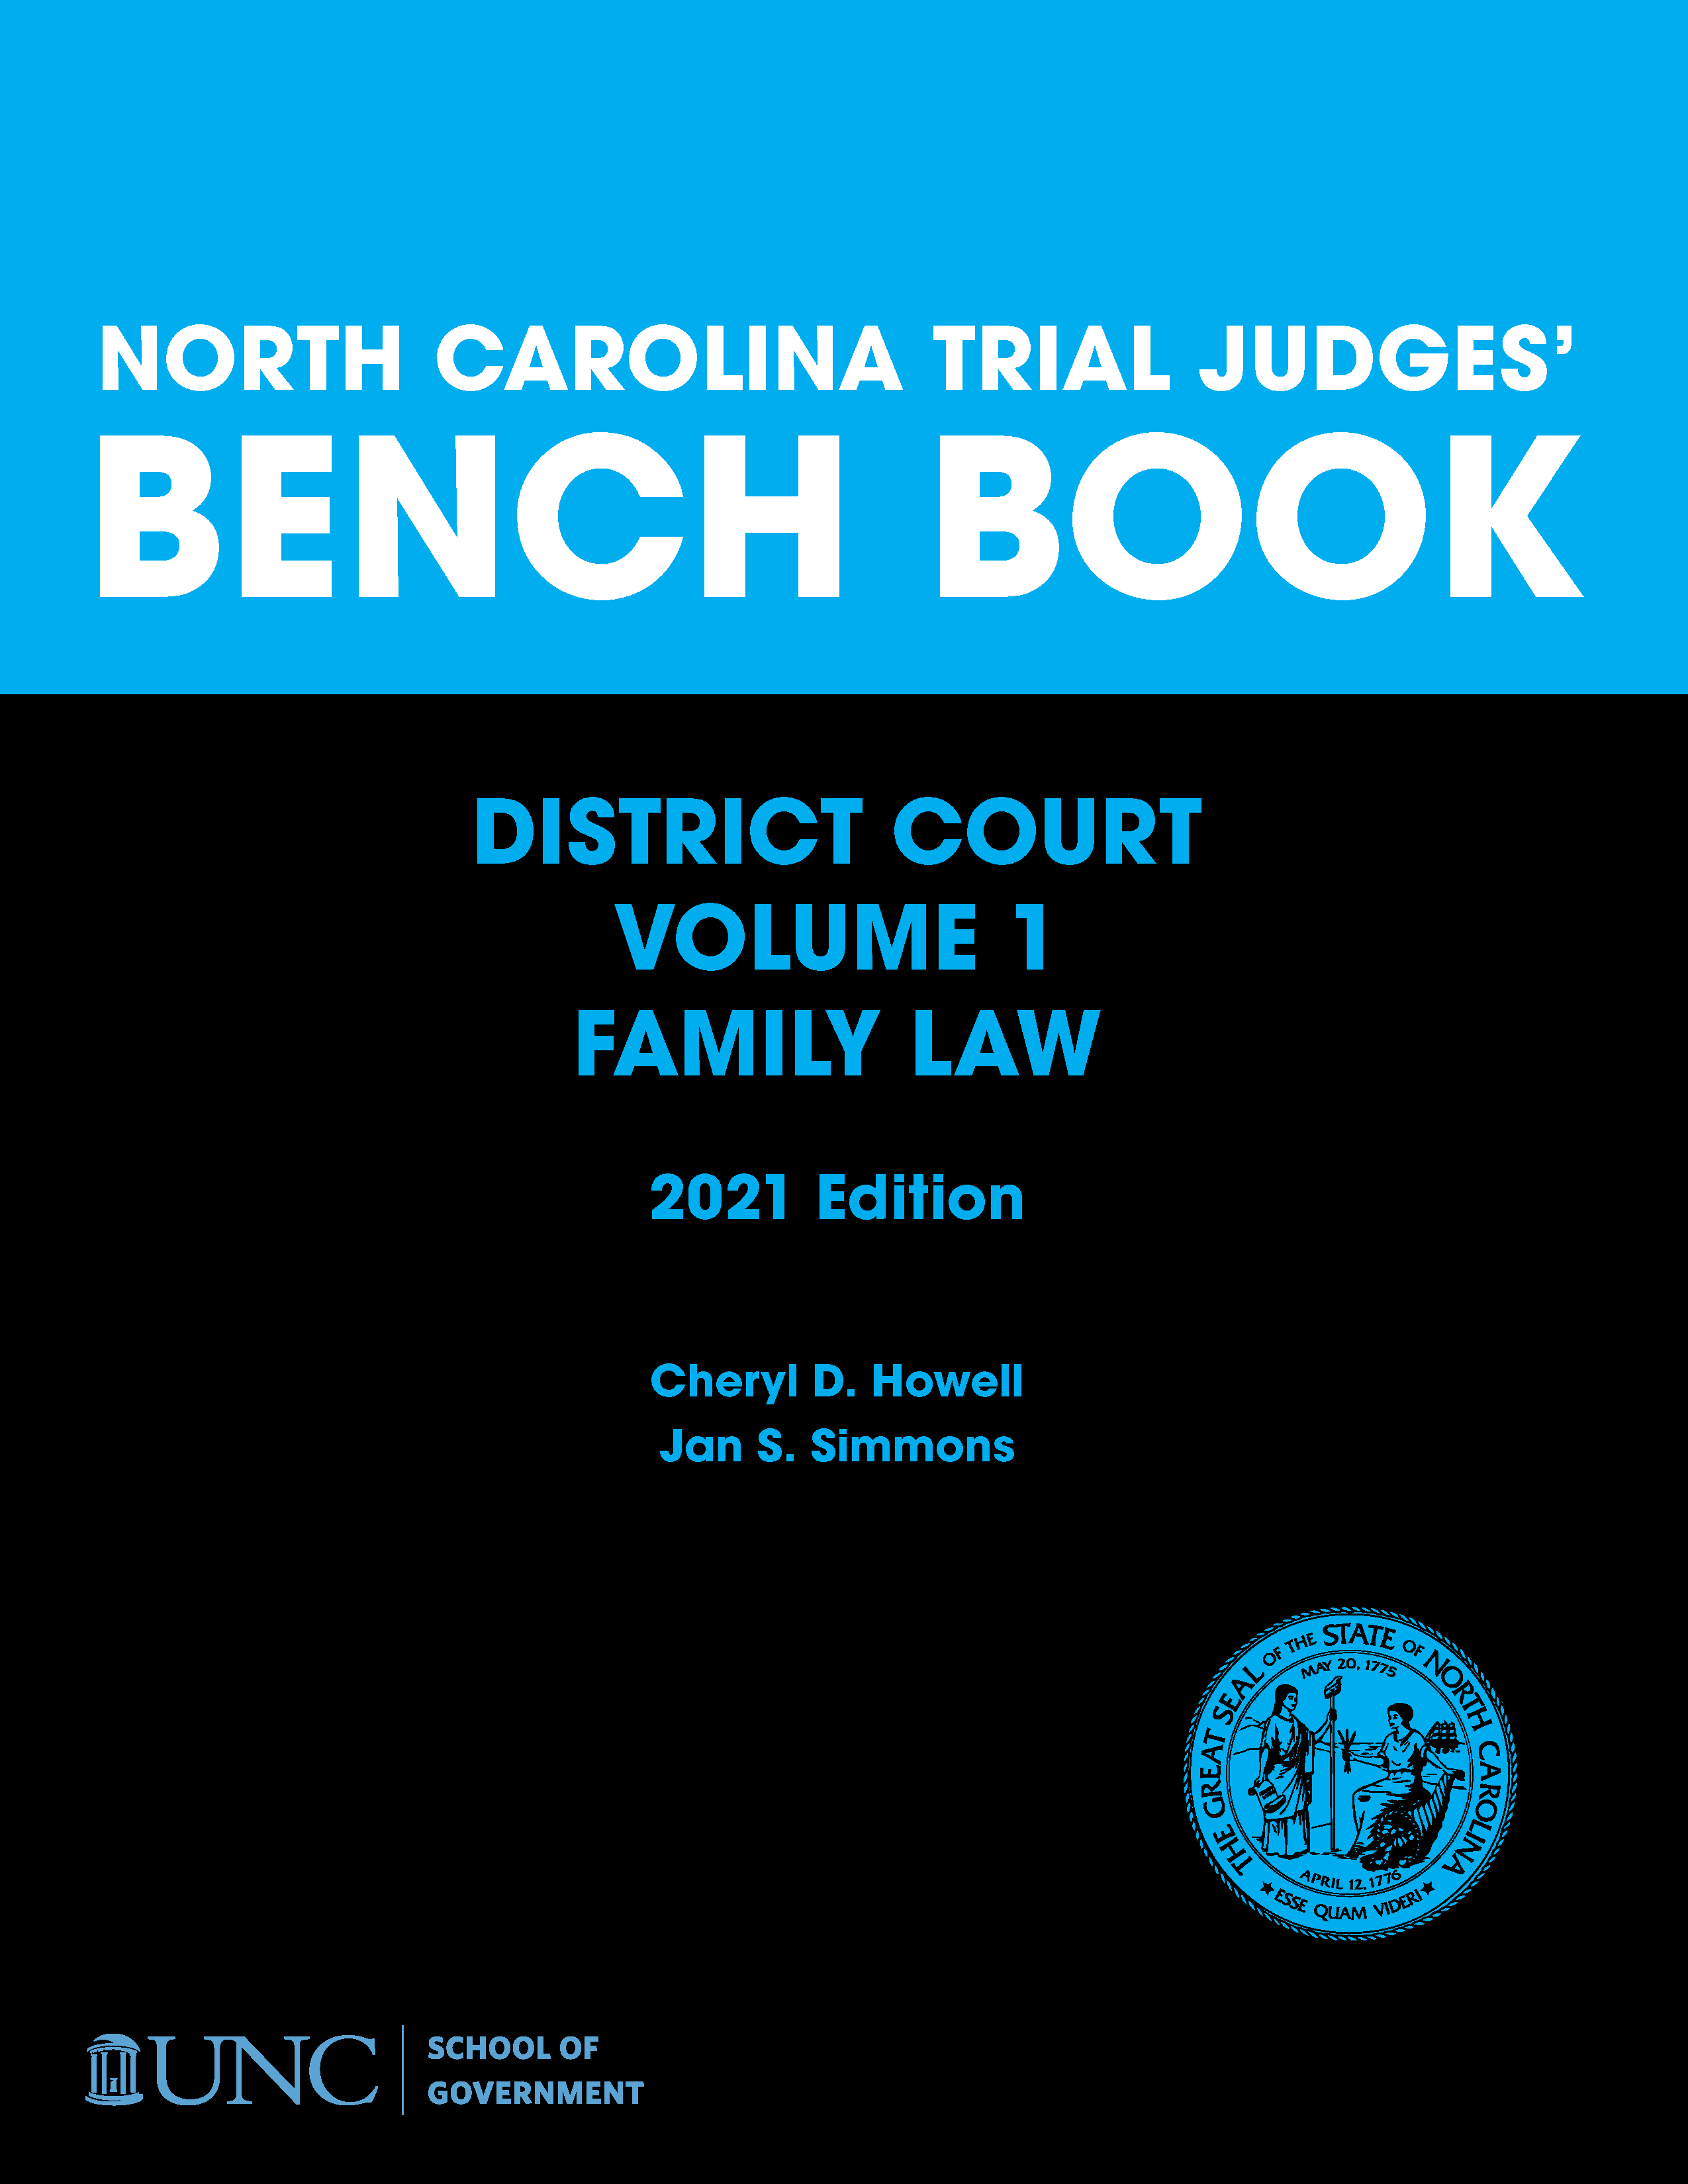 Cover image for North Carolina Trial Judges' Bench Book, District Court, Vol. 1 Family Law, 2021 (digital edition)